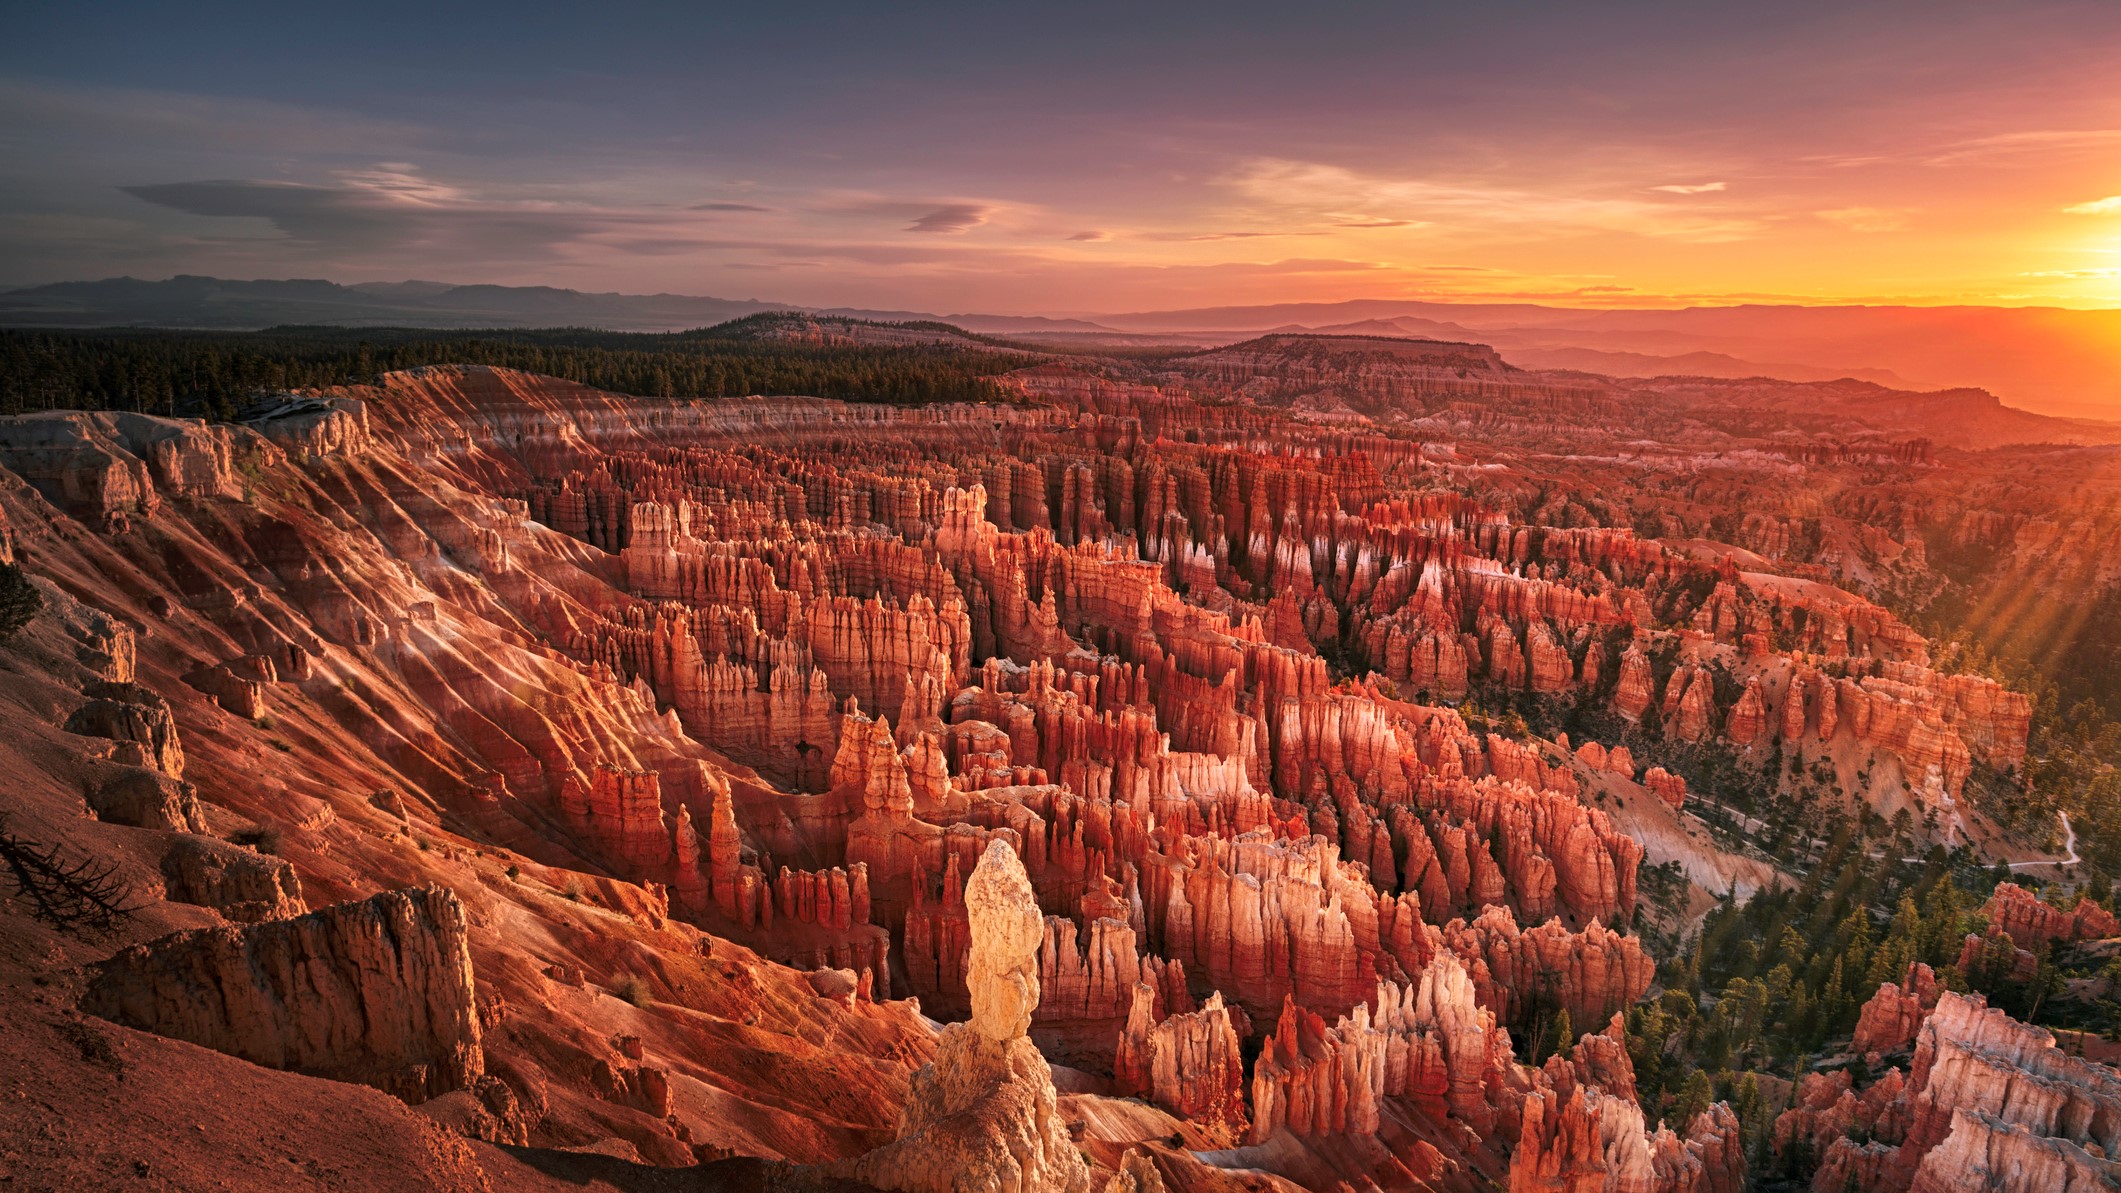 the annular eclipse will be visible from Bryce Canyon National Park, Utah. The image at dawn shows the sun rising off the ride side of the image, bathing the impressive rock structures in the canyon in a golden red light.